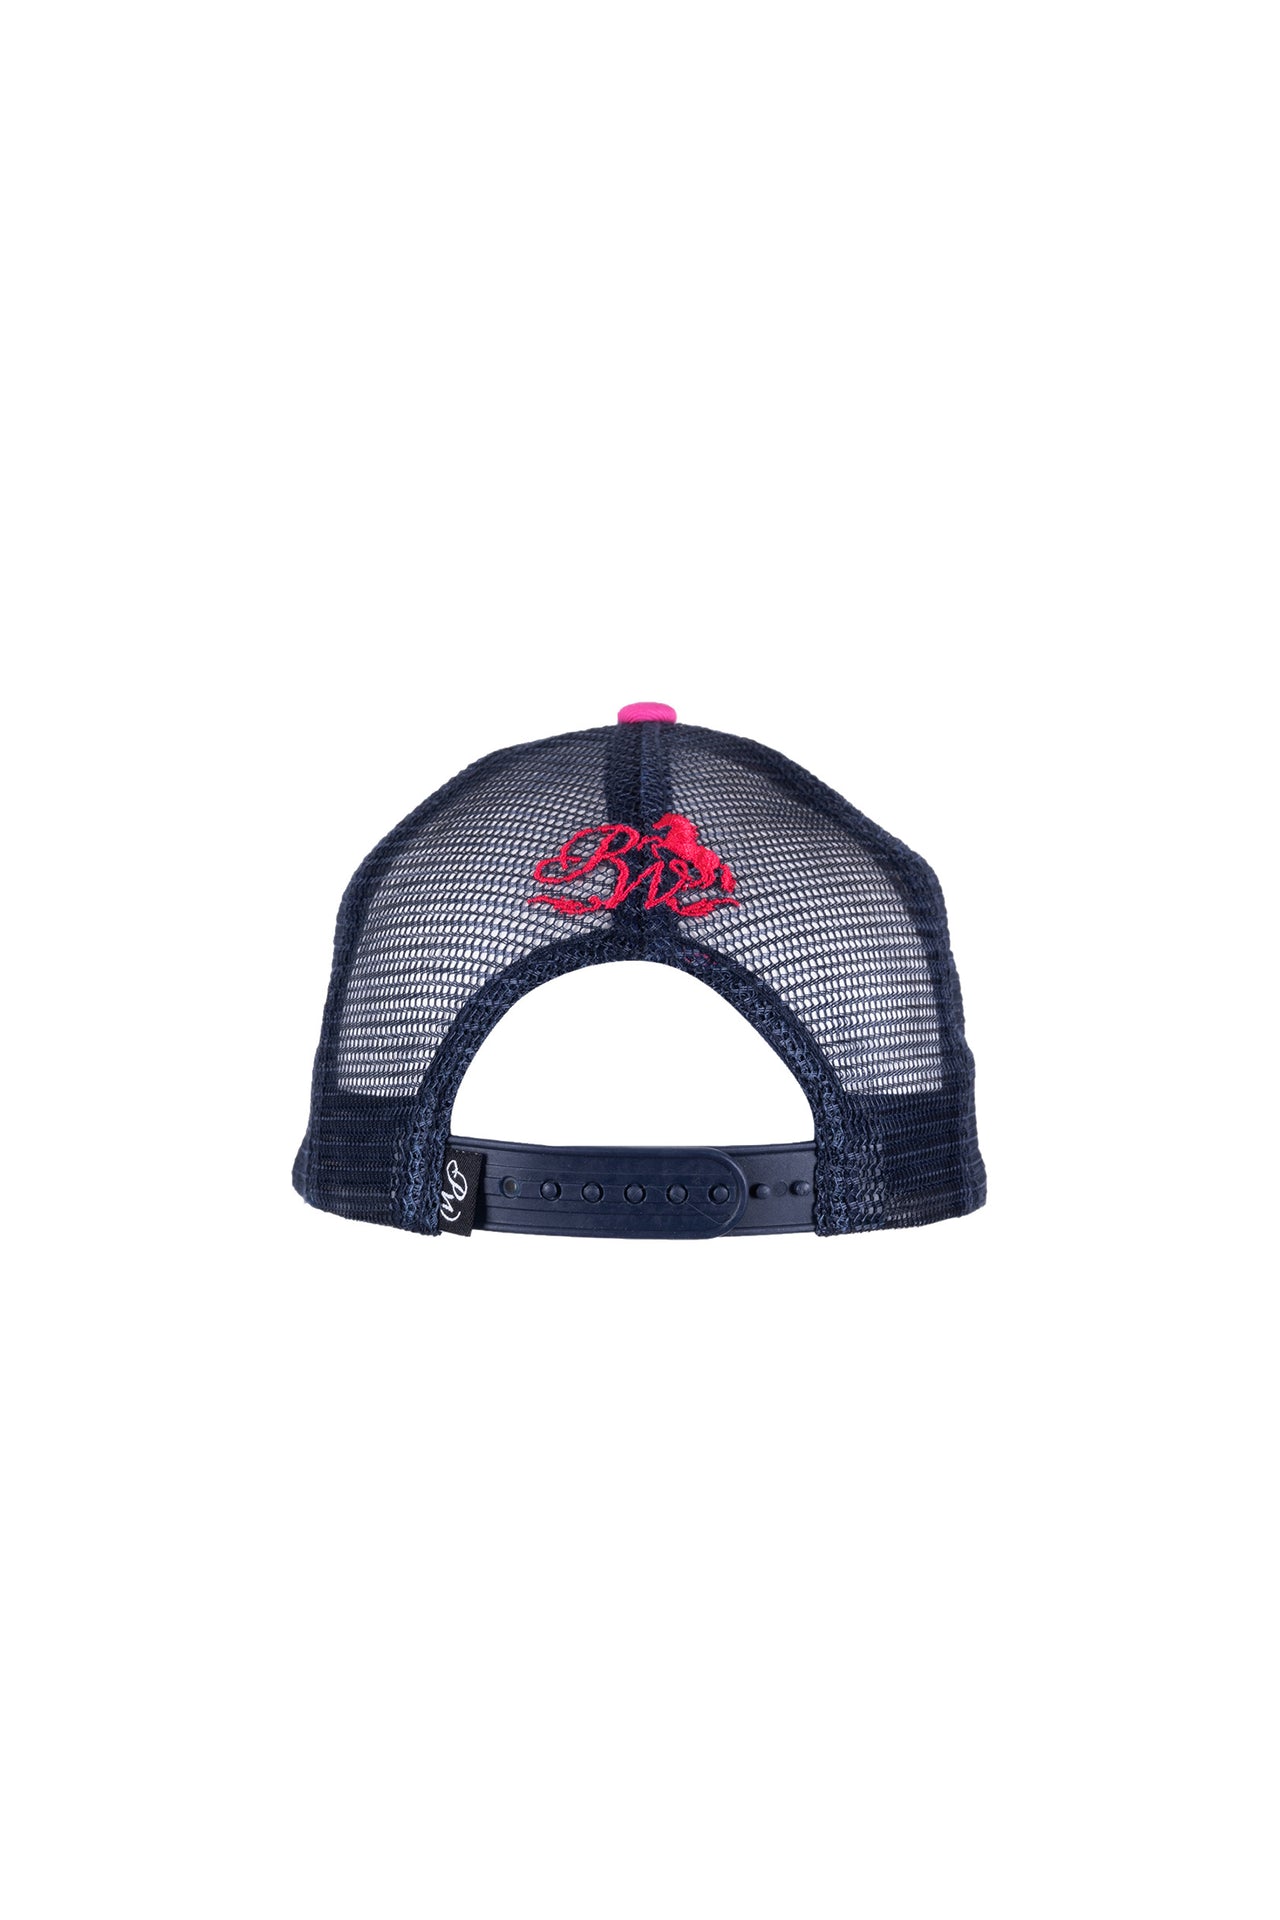 Pure Western Kid's Laylah Trucker Cap - The Trading Stables